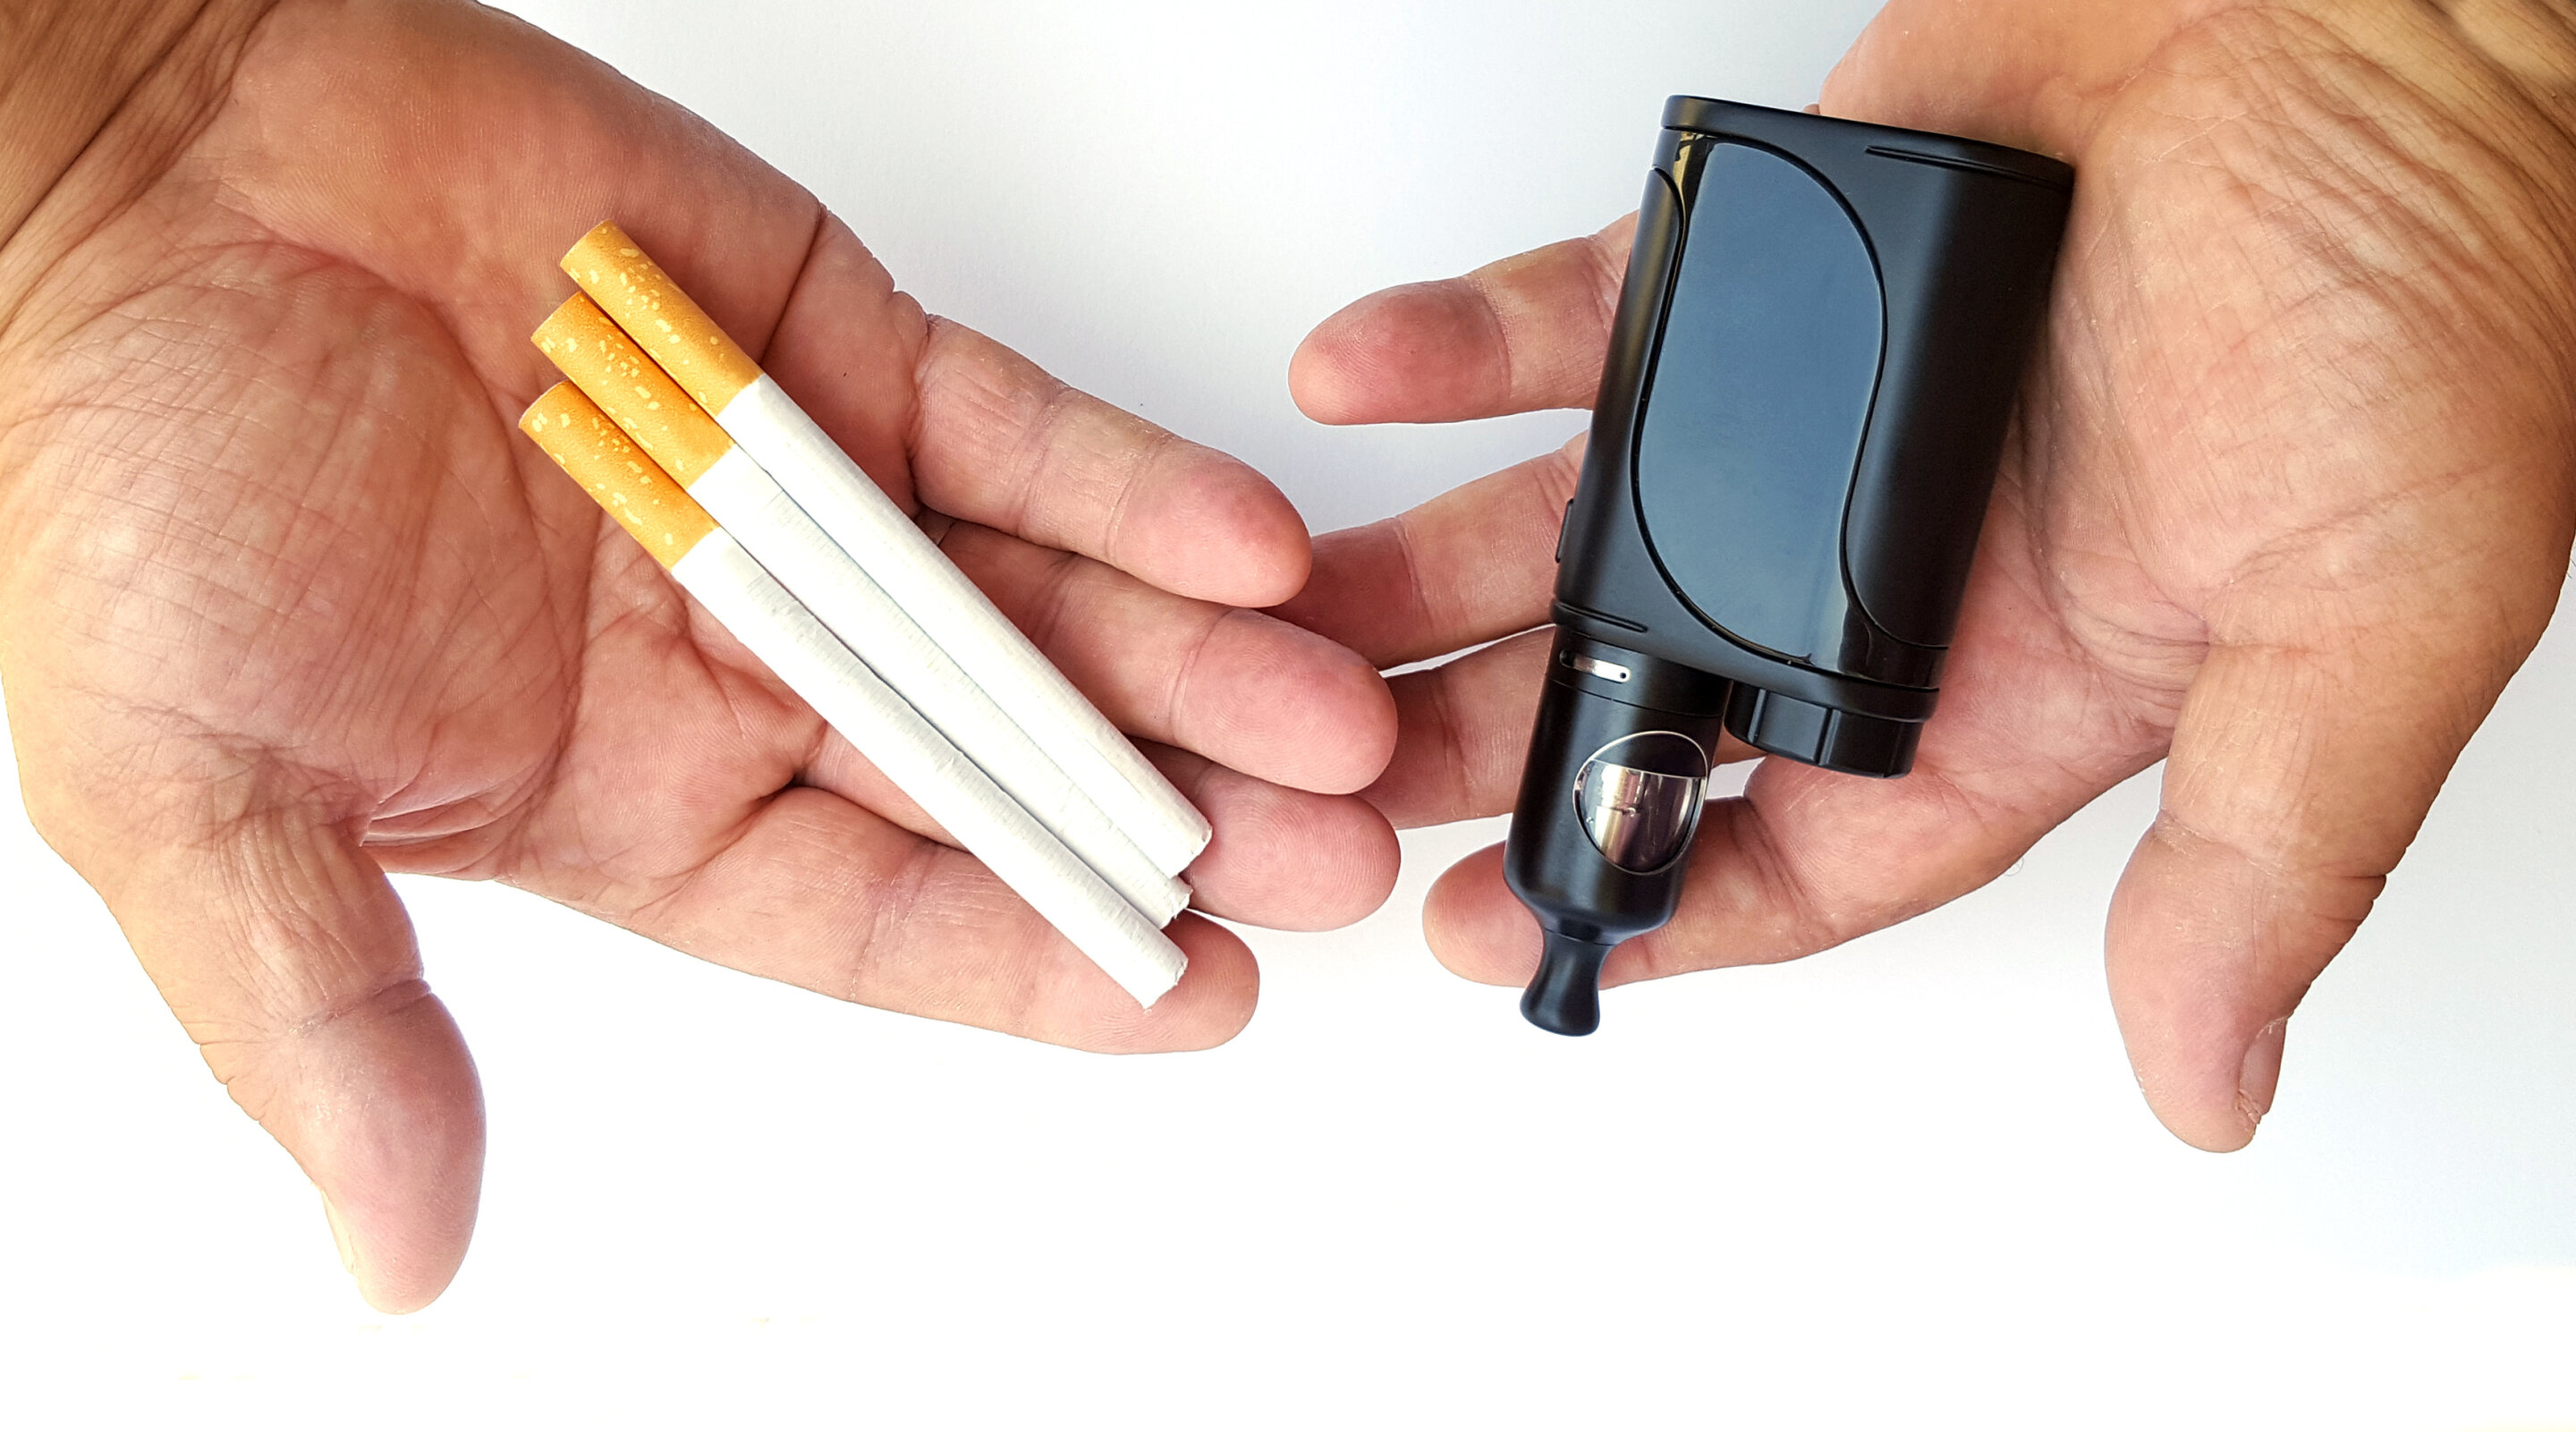 #Study shows public perception of e-cigarettes vs. cigarettes harms changed sharply during pandemic